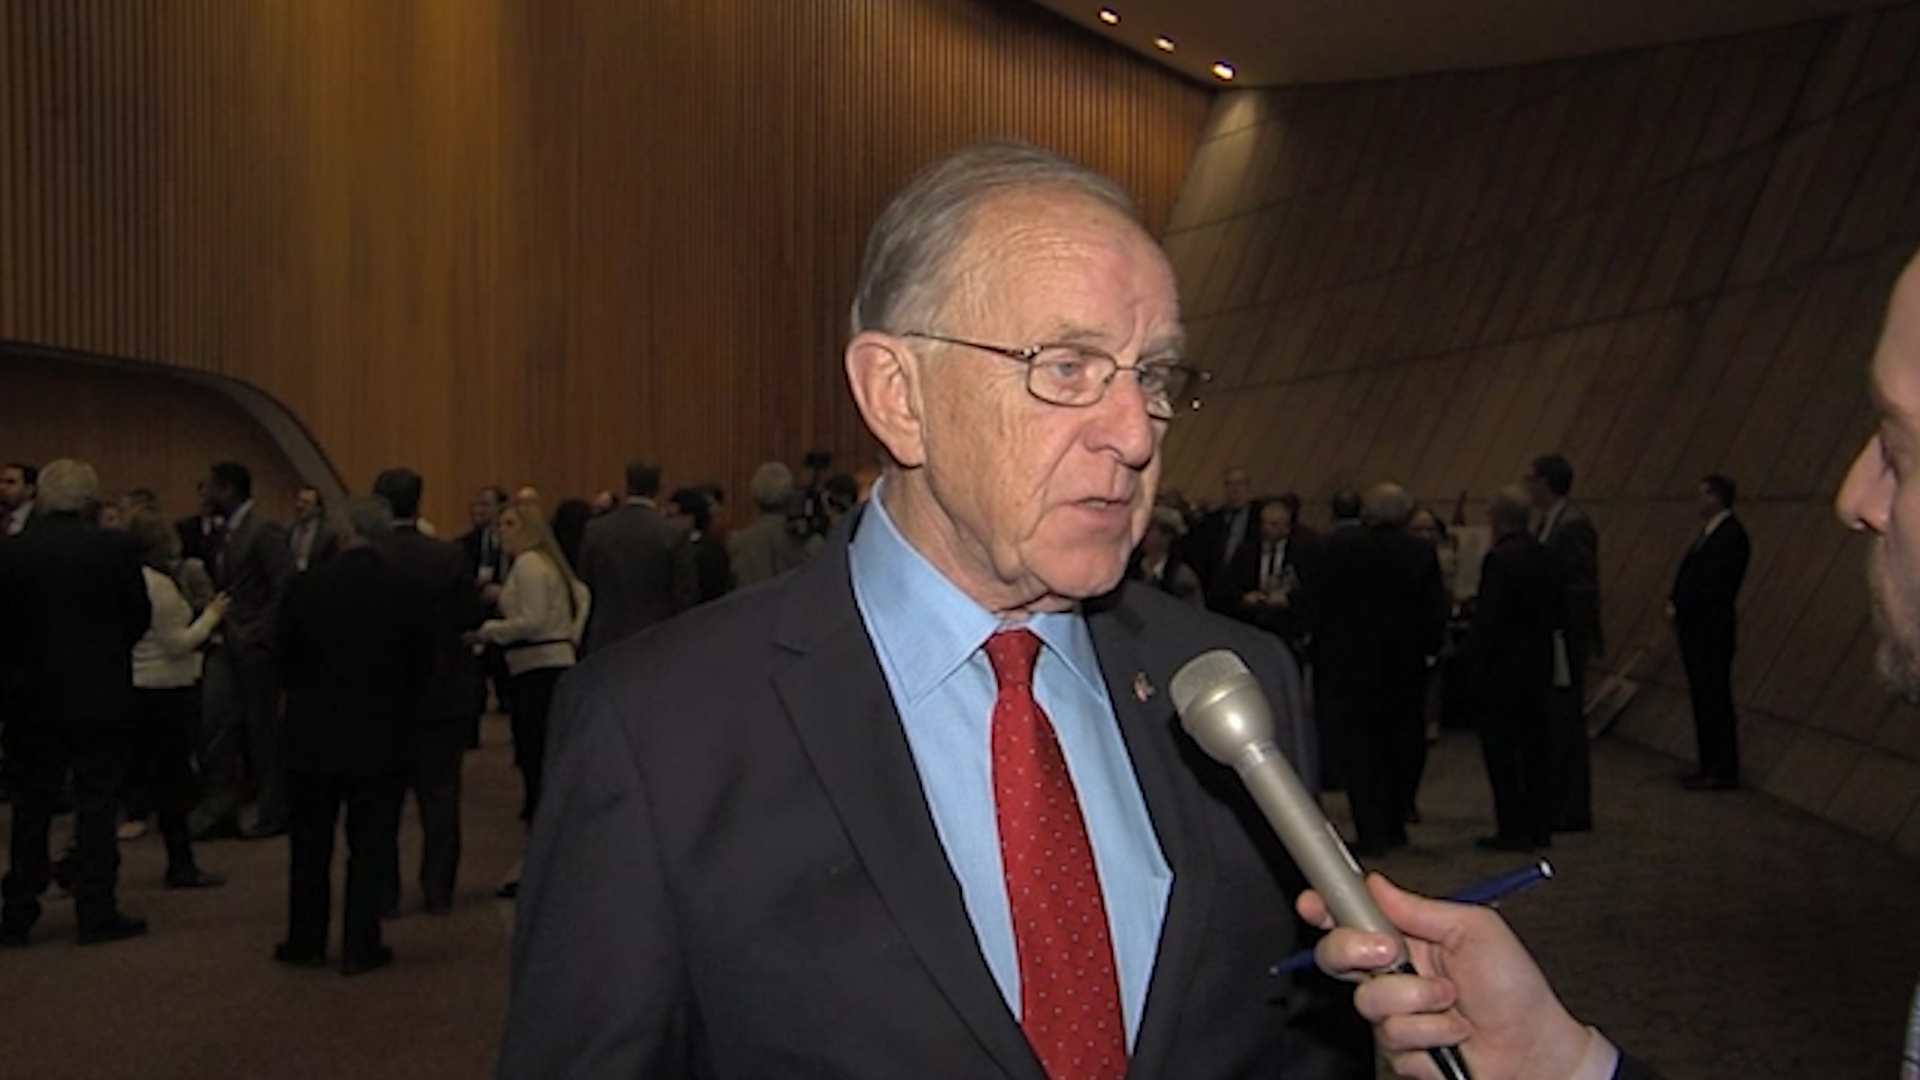 Assemblyman Dave McDonough Reacts to the 2014 State of the State Address